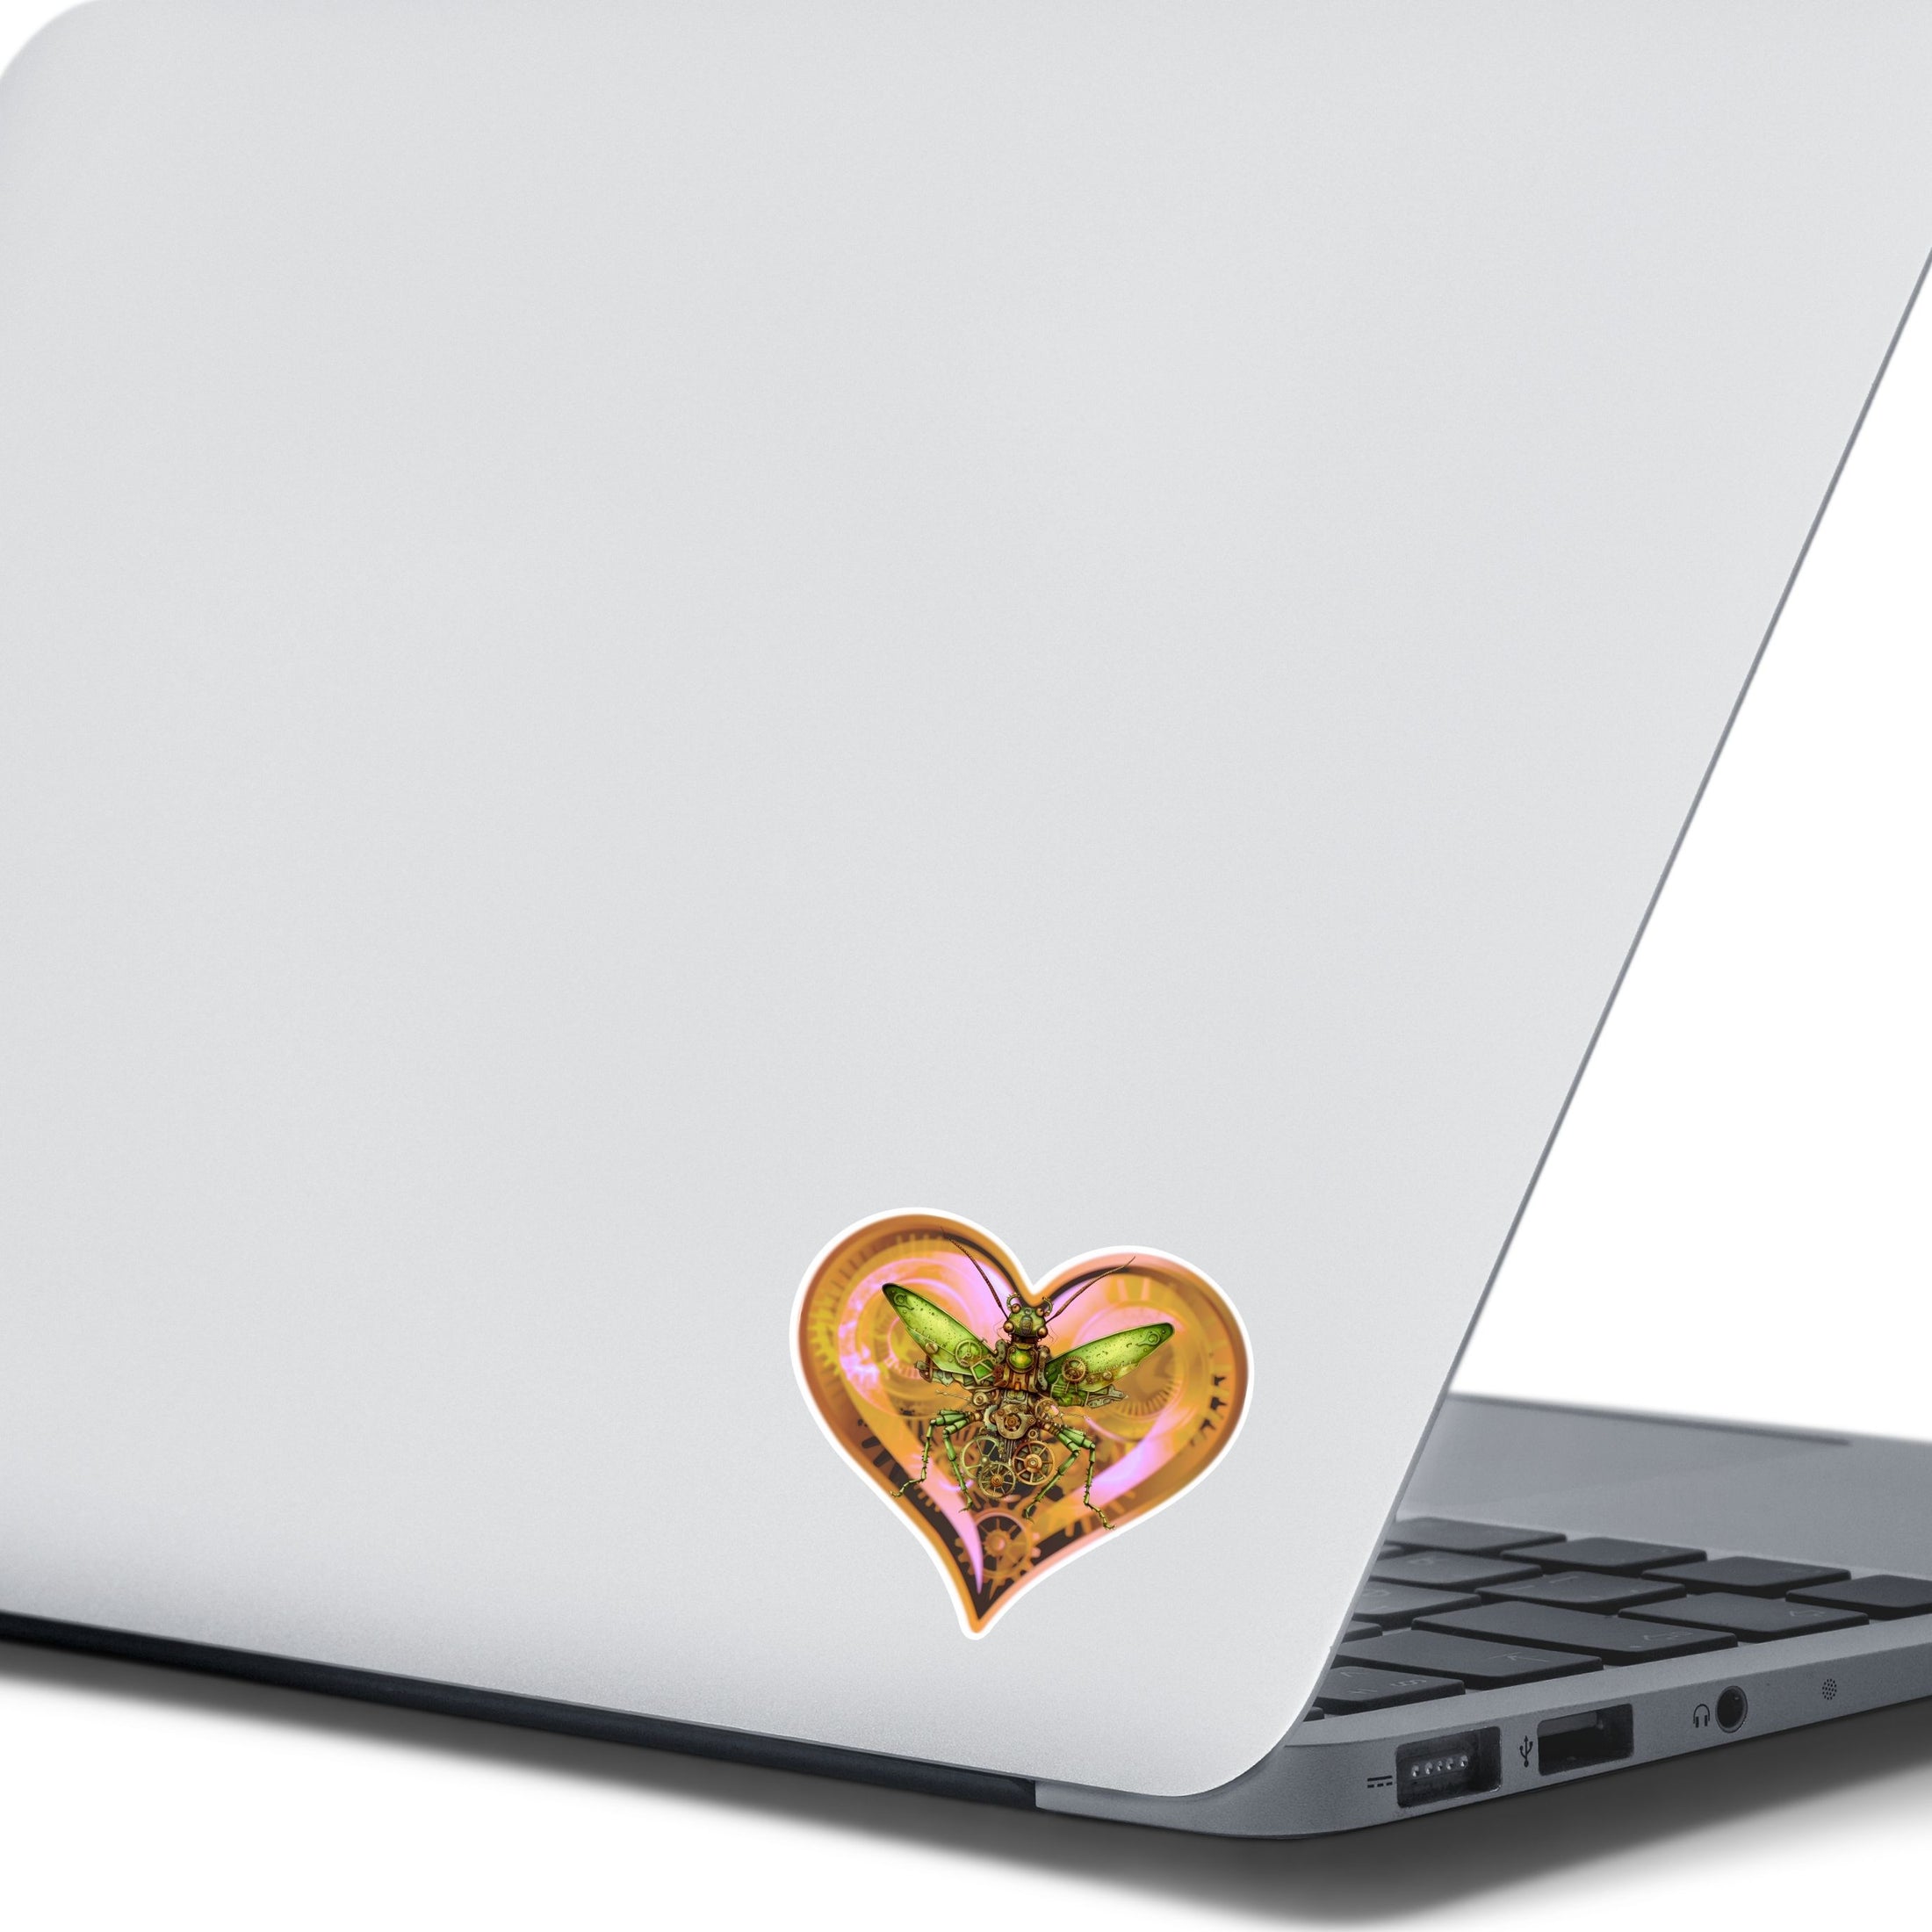 This image shows the steampunk love bug sticker on the back of an open laptop.